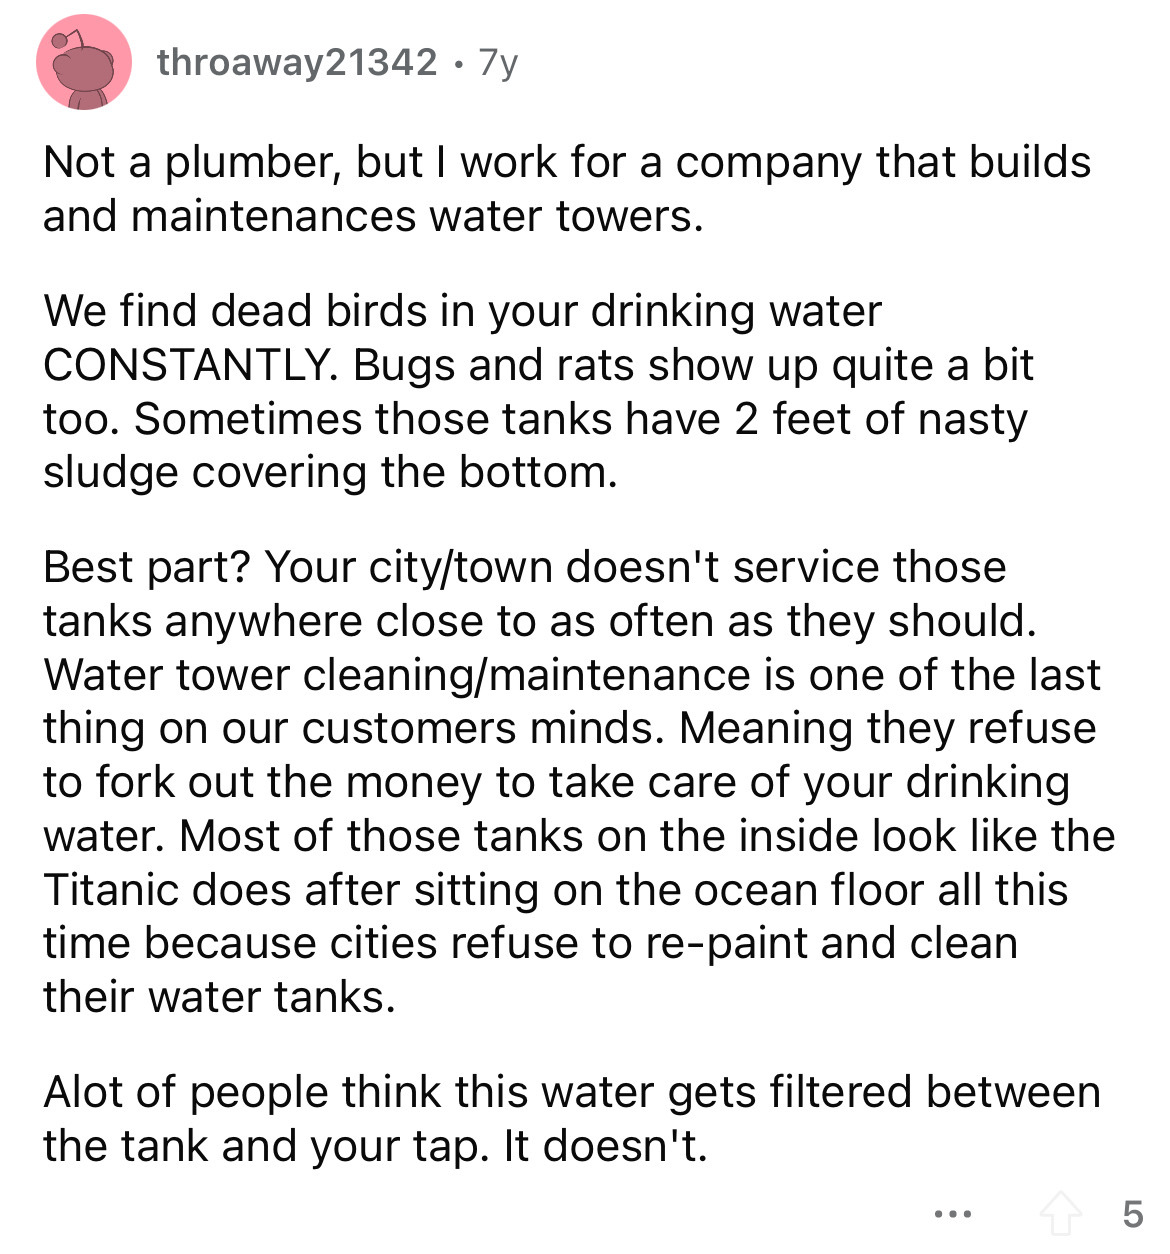 document - throaway21342 7y Not a plumber, but I work for a company that builds and maintenances water towers. We find dead birds in your drinking water Constantly. Bugs and rats show up quite a bit too. Sometimes those tanks have 2 feet of nasty sludge c